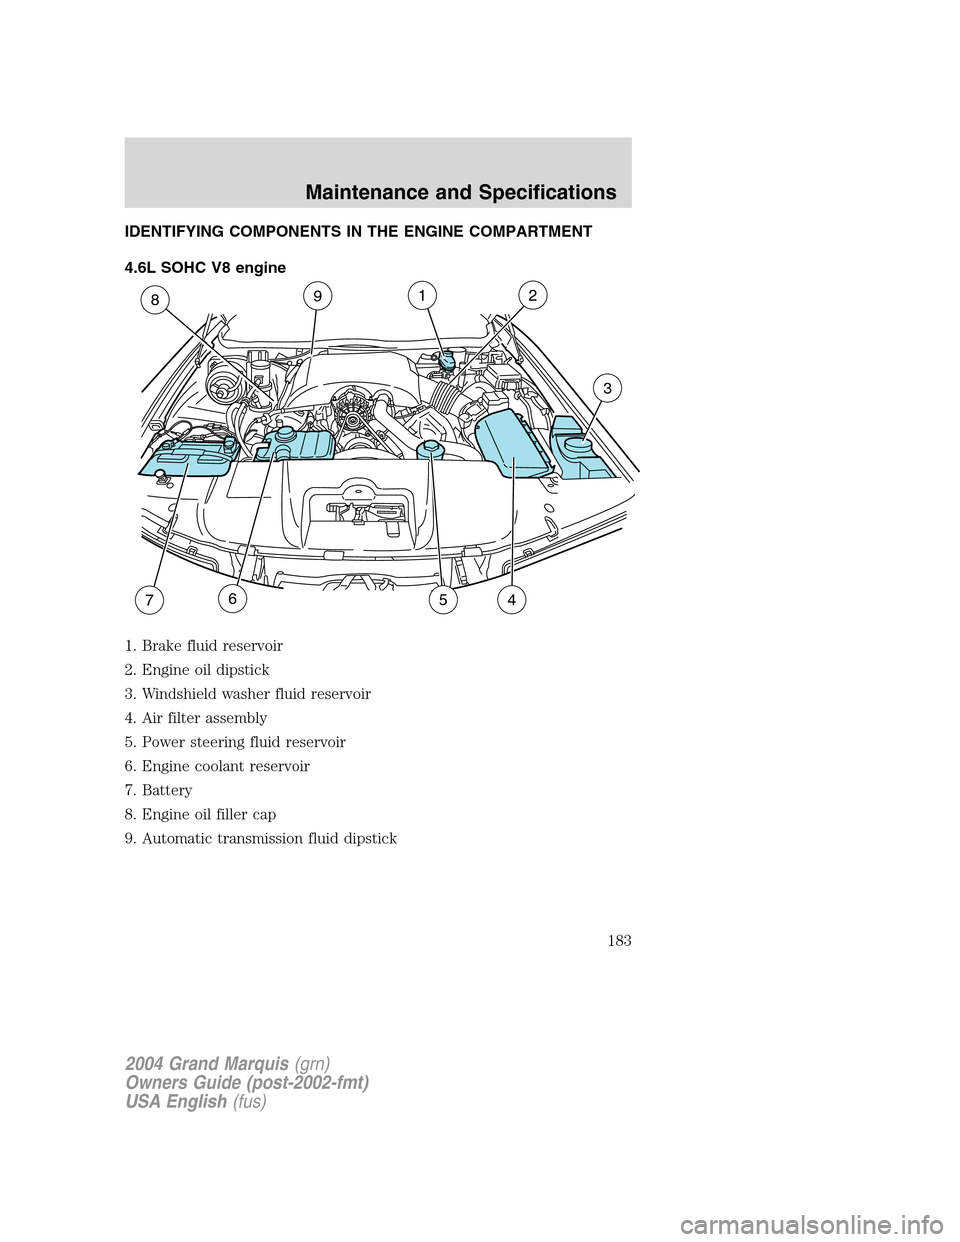 Mercury Grand Marquis 2004  s User Guide IDENTIFYING COMPONENTS IN THE ENGINE COMPARTMENT
4.6L SOHC V8 engine
1. Brake fluid reservoir
2. Engine oil dipstick
3. Windshield washer fluid reservoir
4. Air filter assembly
5. Power steering fluid